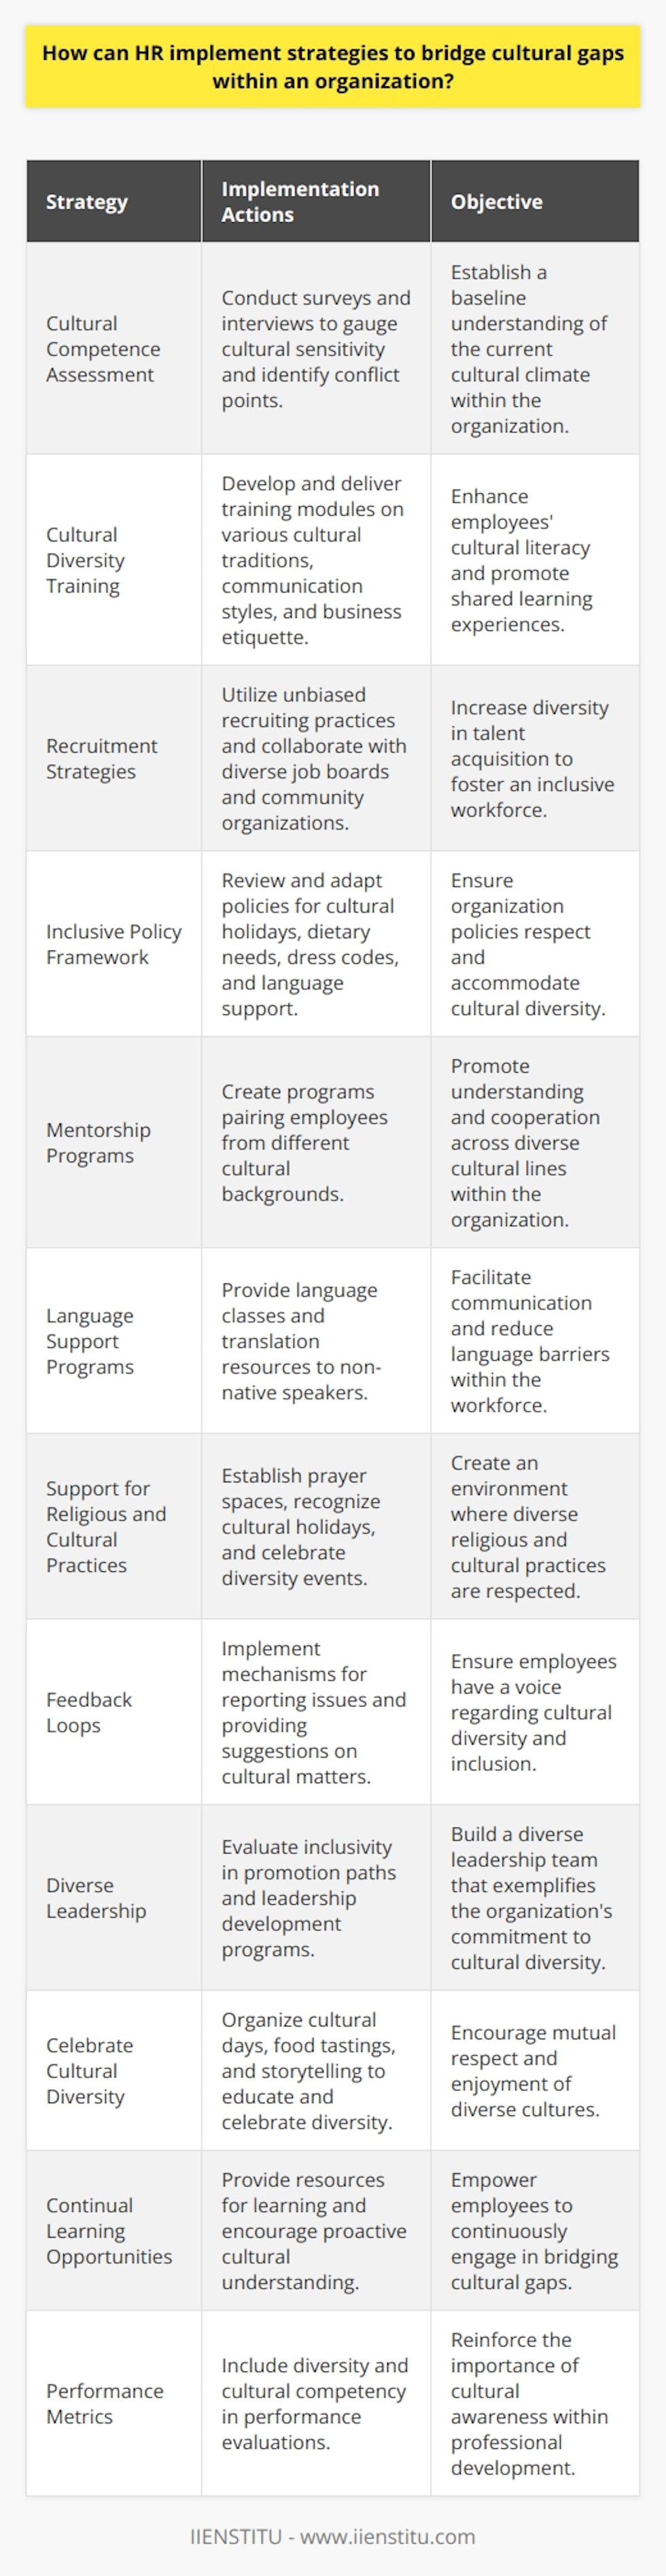 Bridging cultural gaps within an organization is a critical responsibility of Human Resources (HR). To foster a harmonious workplace where diversity is not just acknowledged but celebrated, here are strategical actions HR can implement:1. Cultural Competence Assessment:HR should start with a baseline assessment of cultural competence within the organization. This includes surveys and interviews to understand the current climate, employees' experiences, and potential areas of cultural conflict.2. Comprehensive Cultural Diversity Training:Organizational culture is shaped by shared learning experiences. HR can facilitate cultural diversity training to enhance cultural literacy among employees. Modules can range from history and traditions to communication styles and business etiquette of various cultures.3. Recruitment Strategies:HR can broaden its recruitment strategy to ensure a diverse talent pool. This means adopting unbiased recruiting practices and working with a variety of job boards and community organizations.4. Inclusive Policy Framework:Policies within the organization need to reflect an appreciation for diversity. HR can review current policies to ensure they accommodate cultural holidays, dietary requirements, dress codes, and language needs.5. Mentorship Programs:HR can create mentorship and buddy systems pairing employees from different cultural backgrounds to enhance understanding and cooperation.6. Language Support Programs:Offering language support programs can break down significant barriers within a workforce that includes non-native speakers. This may involve language classes or translation resources.7. Support for Religious and Cultural Practices:HR can establish designated spaces for prayer or meditation and acknowledge different cultural events and holidays within the office.8. Feedback Loops:Implement feedback mechanisms where employees can report issues, provide suggestions, and feel heard regarding cultural matters.9. Diverse Leadership:Cultivating a diverse leadership team sends a strong message about the organization's commitment to bridging cultural gaps. HR should evaluate promotion paths and leadership development programs for inclusivity.10. Celebrate Cultural Diversity:Organizing cultural days, food tastings, and storytelling sessions can serve as celebratory and educational activities that foster mutual respect and enjoyment of cultural diversity.11. Continual Learning Opportunities:HR should provide access to books, articles, and other resources on cultural understanding. Encouraging continued learning can make employees proactive participants in bridging cultural gaps.12. Performance Metrics:Include diversity and cultural competency as part of performance reviews. Employees should understand that cultural awareness directly contributes to their professional evaluation.The process of bridging cultural gaps is ongoing, and HR should remain agile, regularly revising strategies to align with the evolving cultural landscapes within the workplace. This proactive approach can vastly improve collaboration, employee satisfaction, and overall success within an organization.